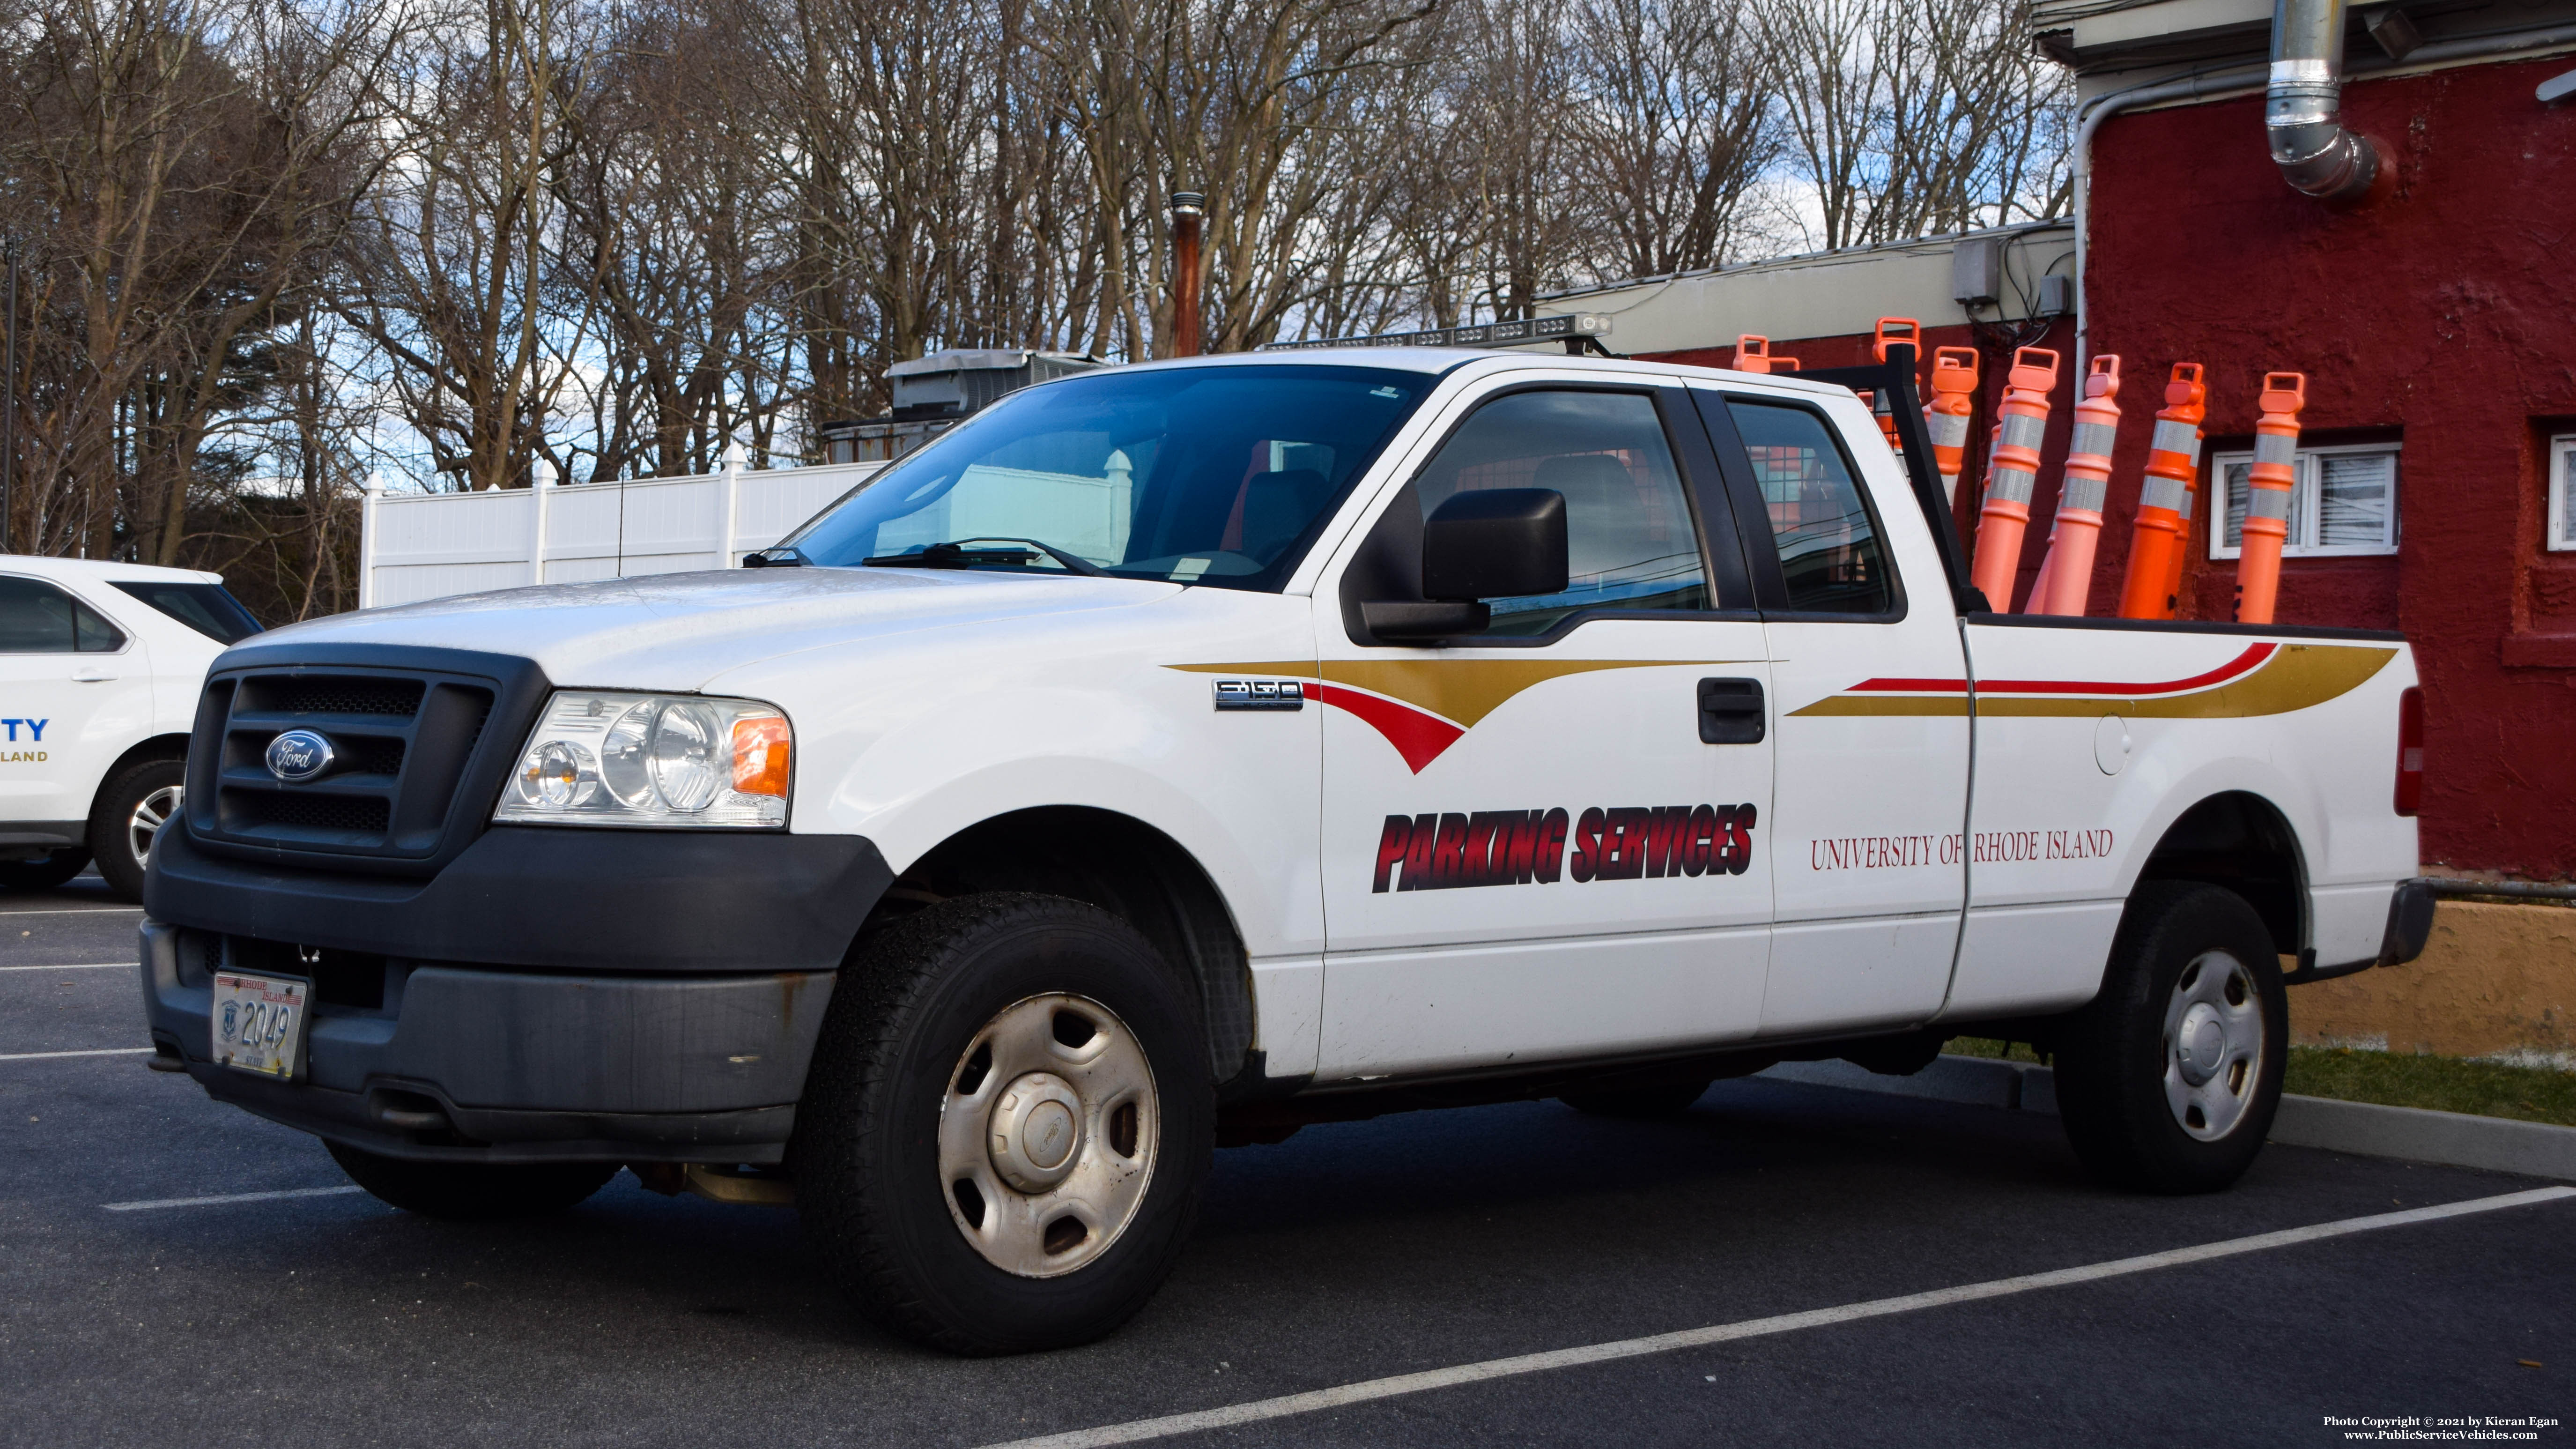 A photo  of University of Rhode Island Police
            Parking Services Unit, a 2005-2008 Ford F-150 SuperCab             taken by Kieran Egan